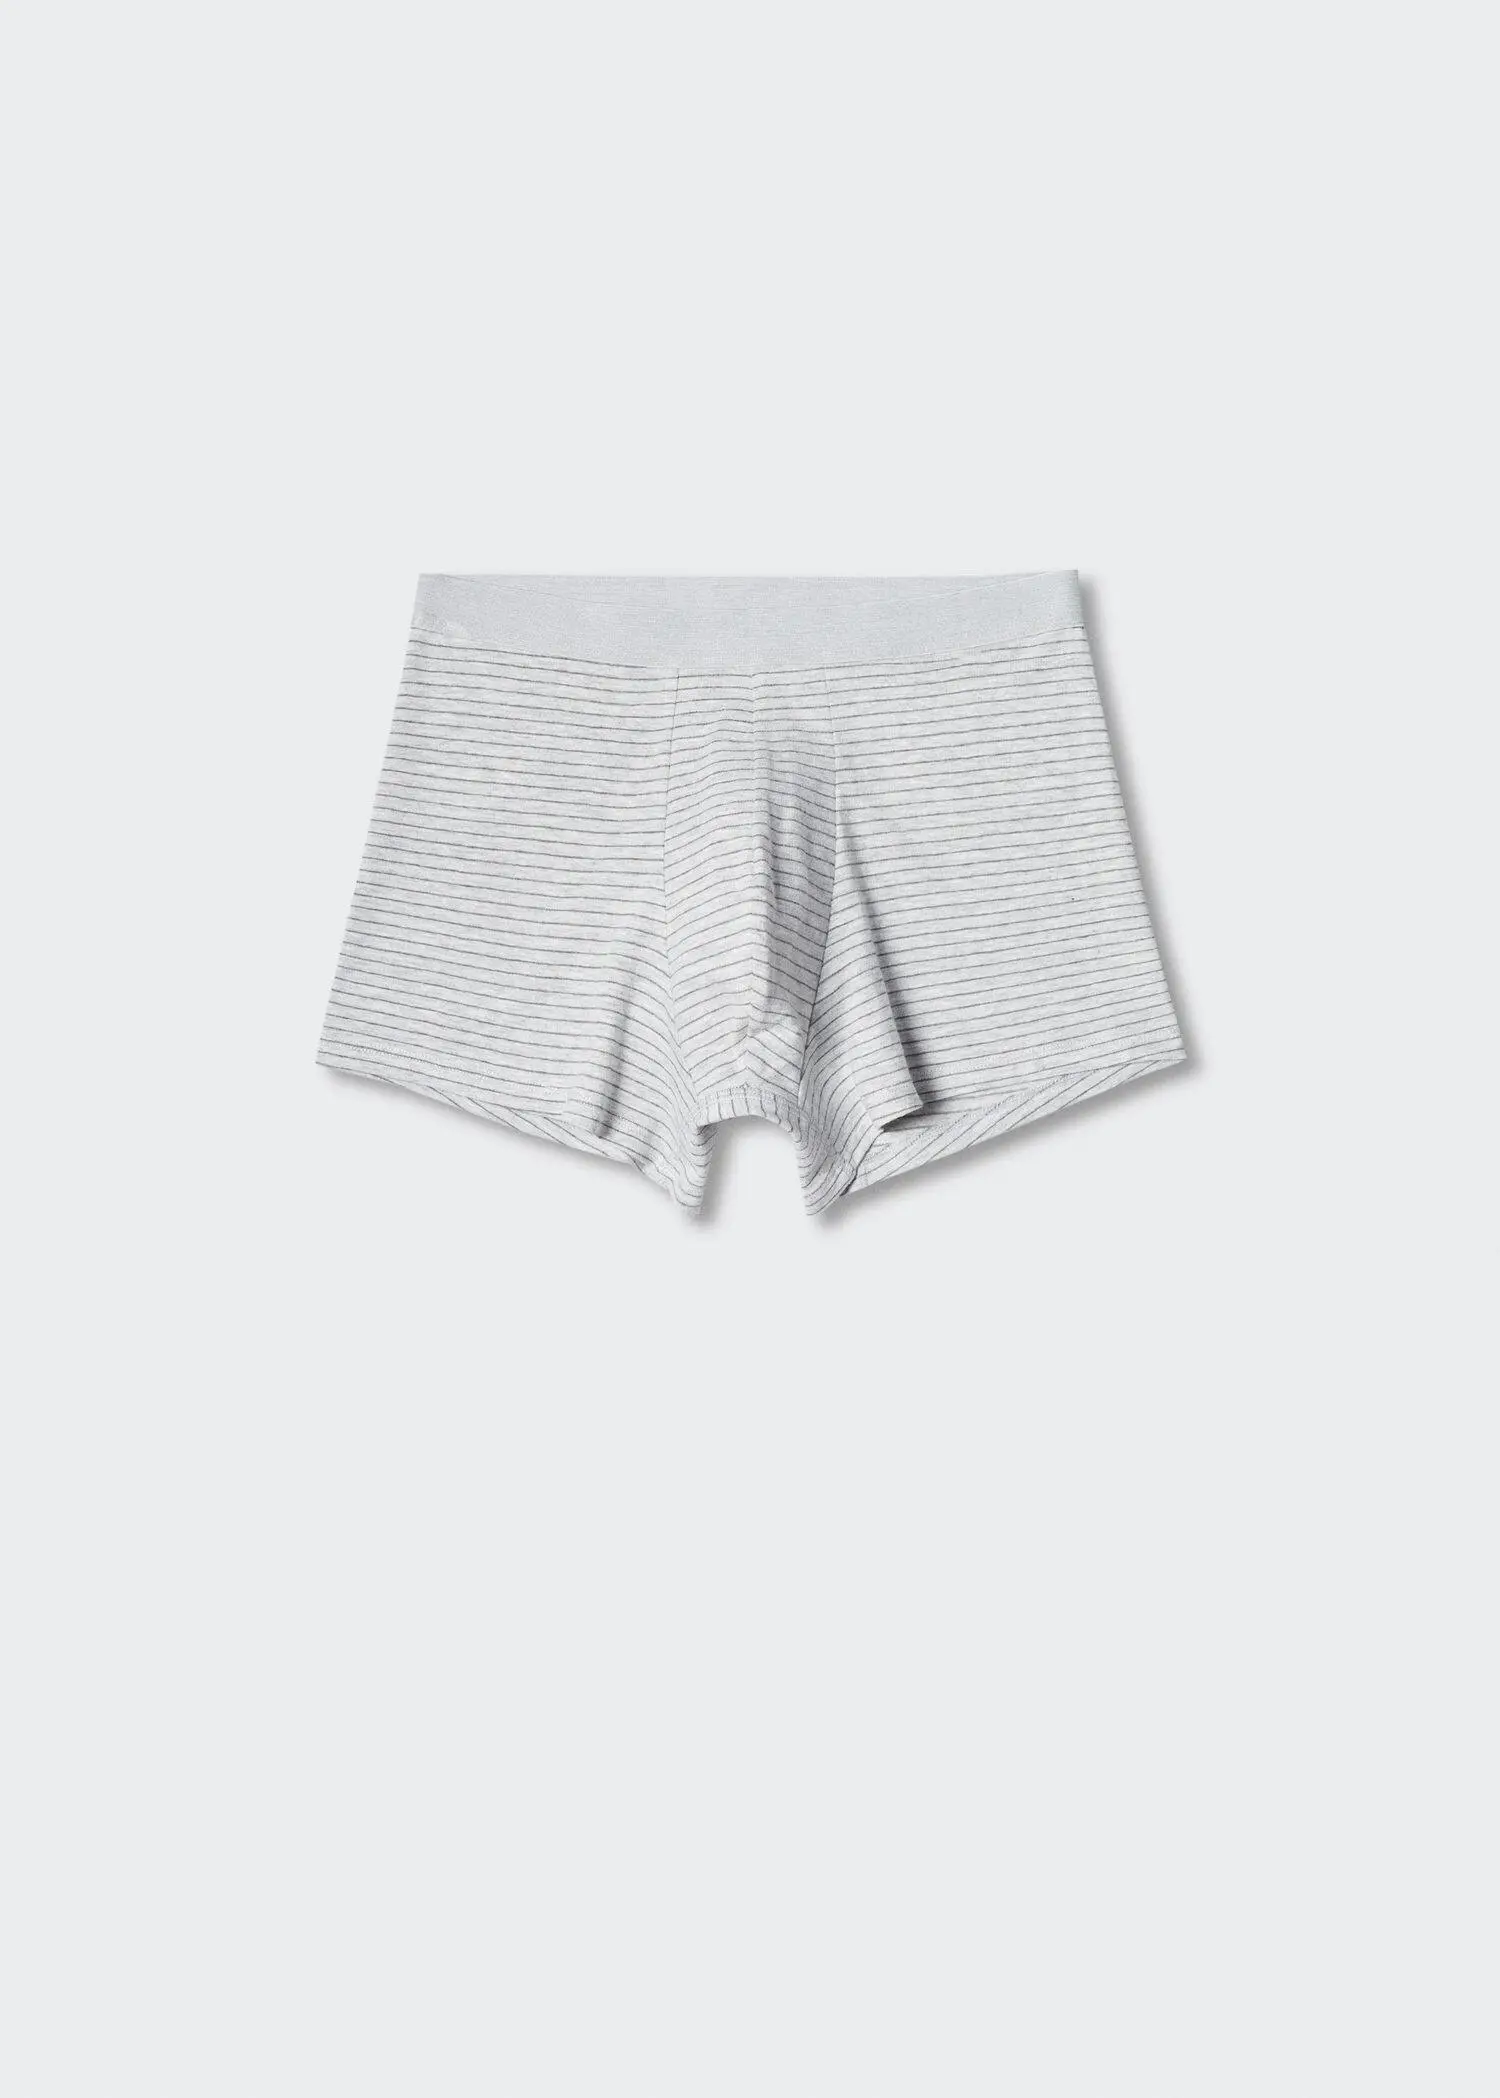 Mango Basic boxer 2 pack. a pair of white and black striped boxers. 